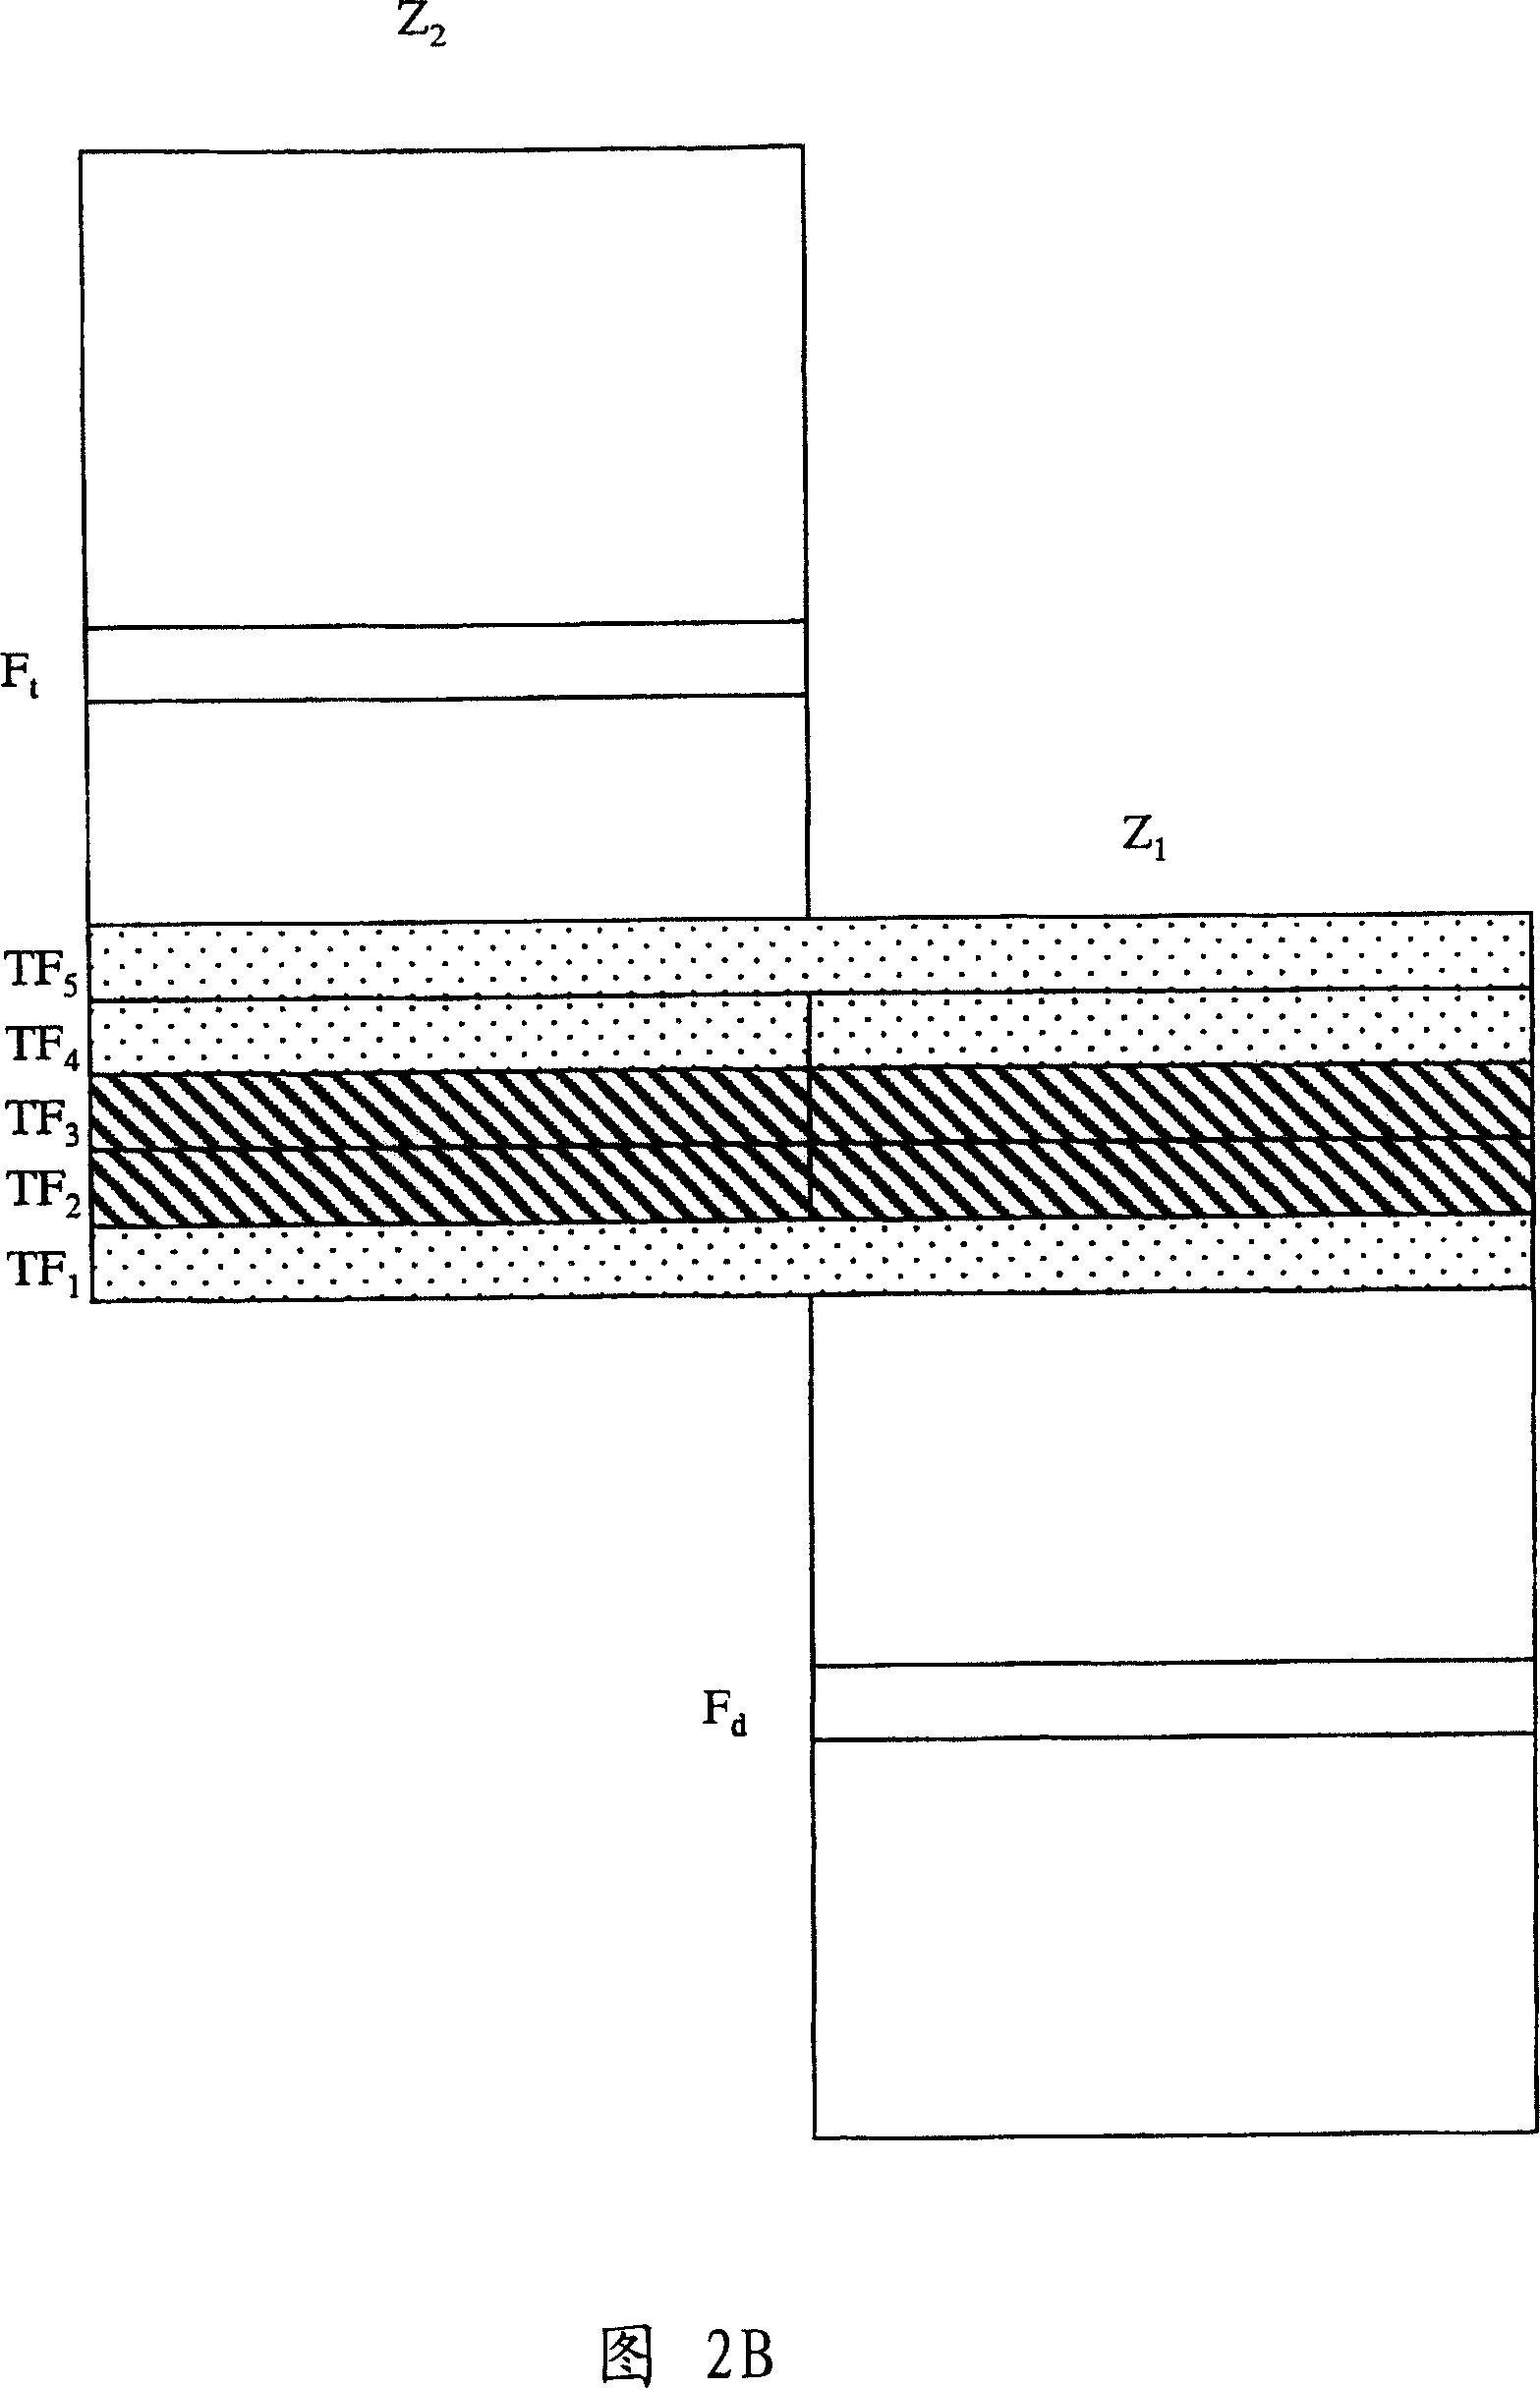 Method for controlling the elevators in an elevator group